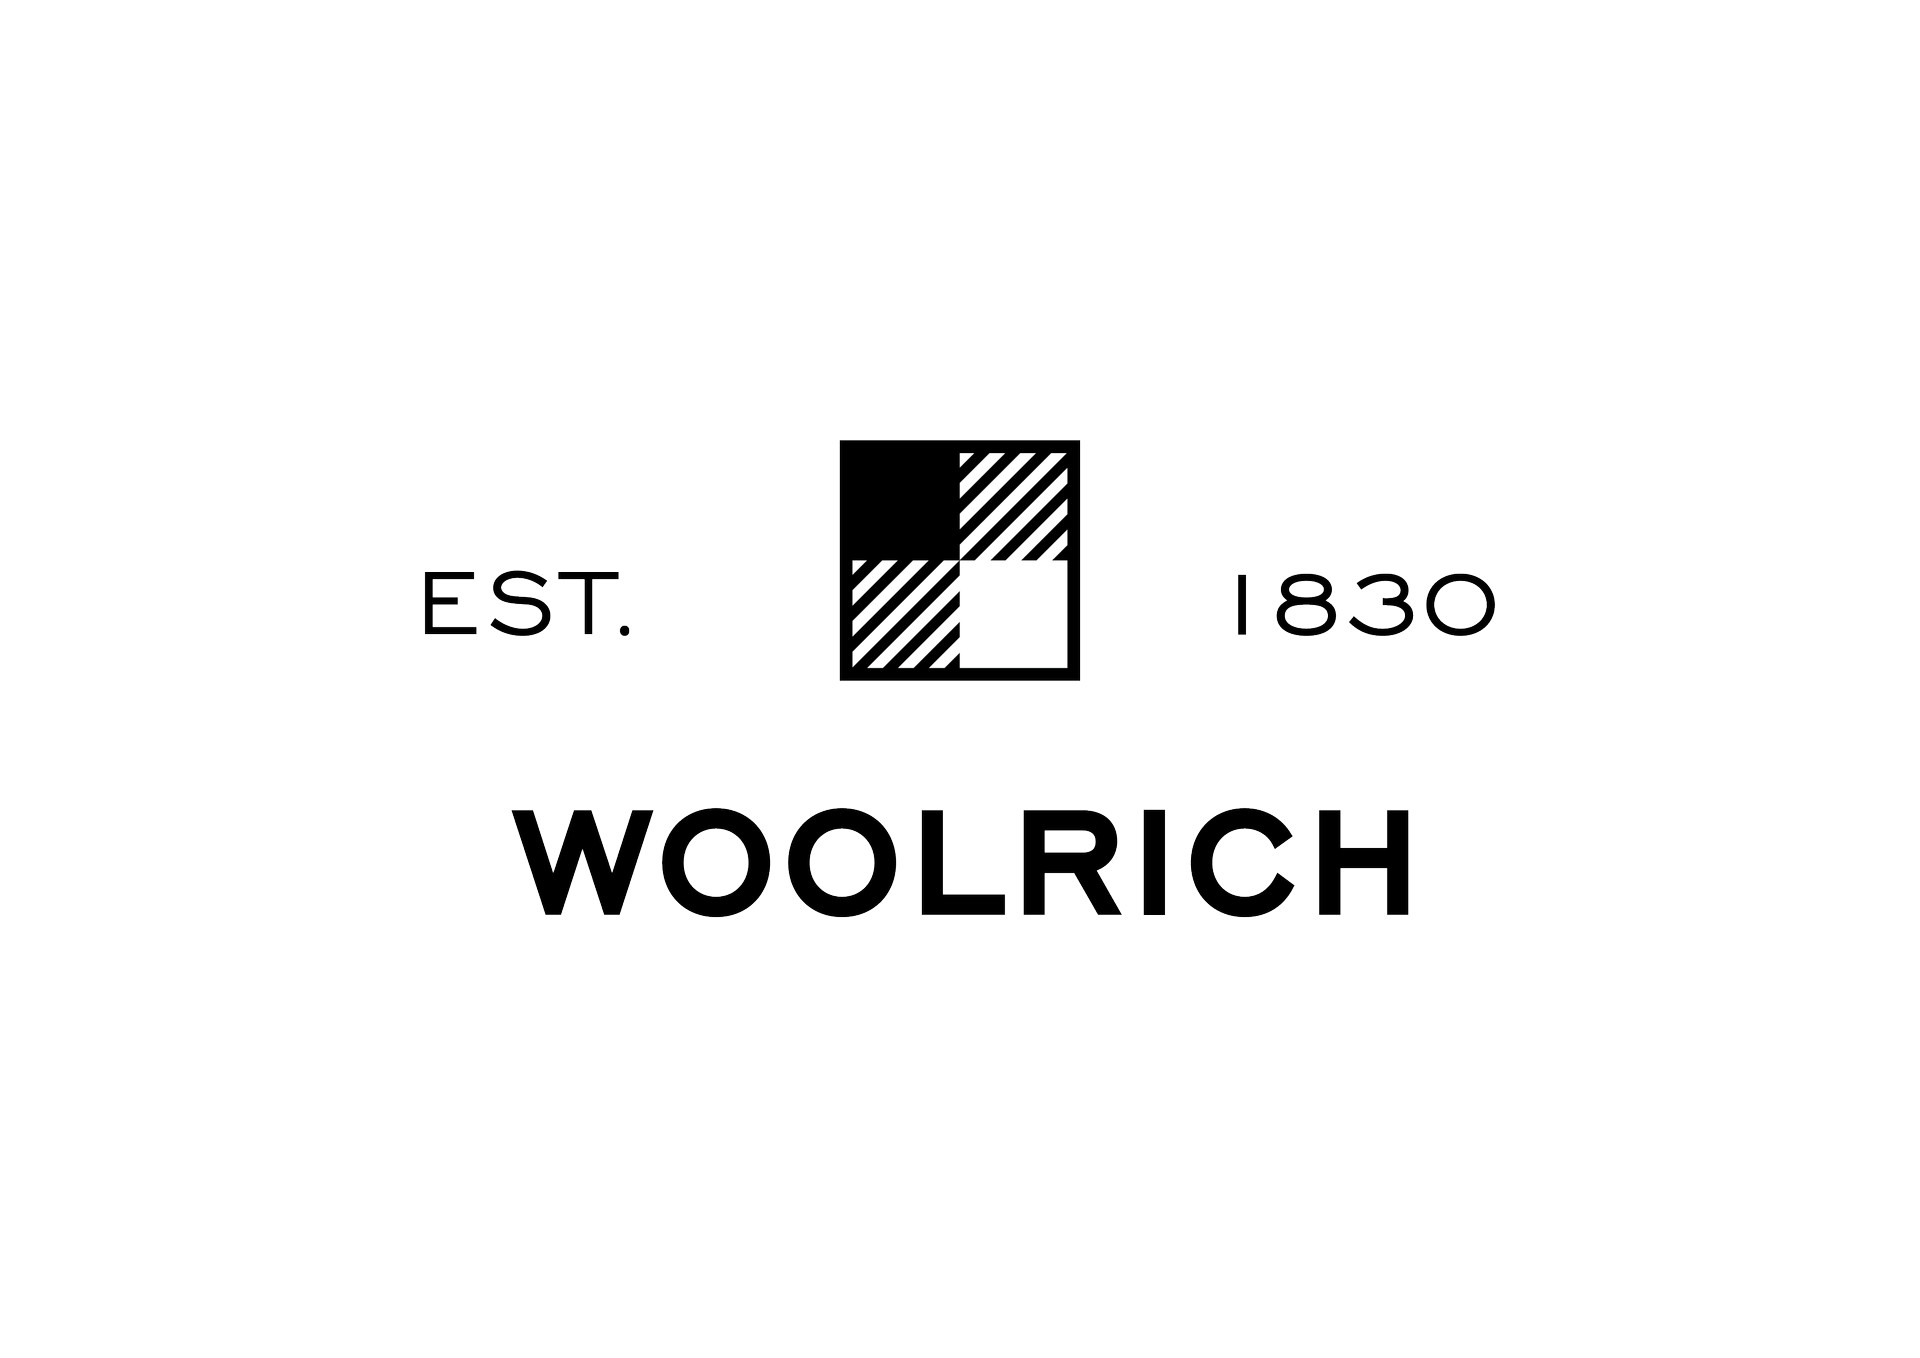 woolrich donna sconti	coupon woolrich	woolrich codice sconto